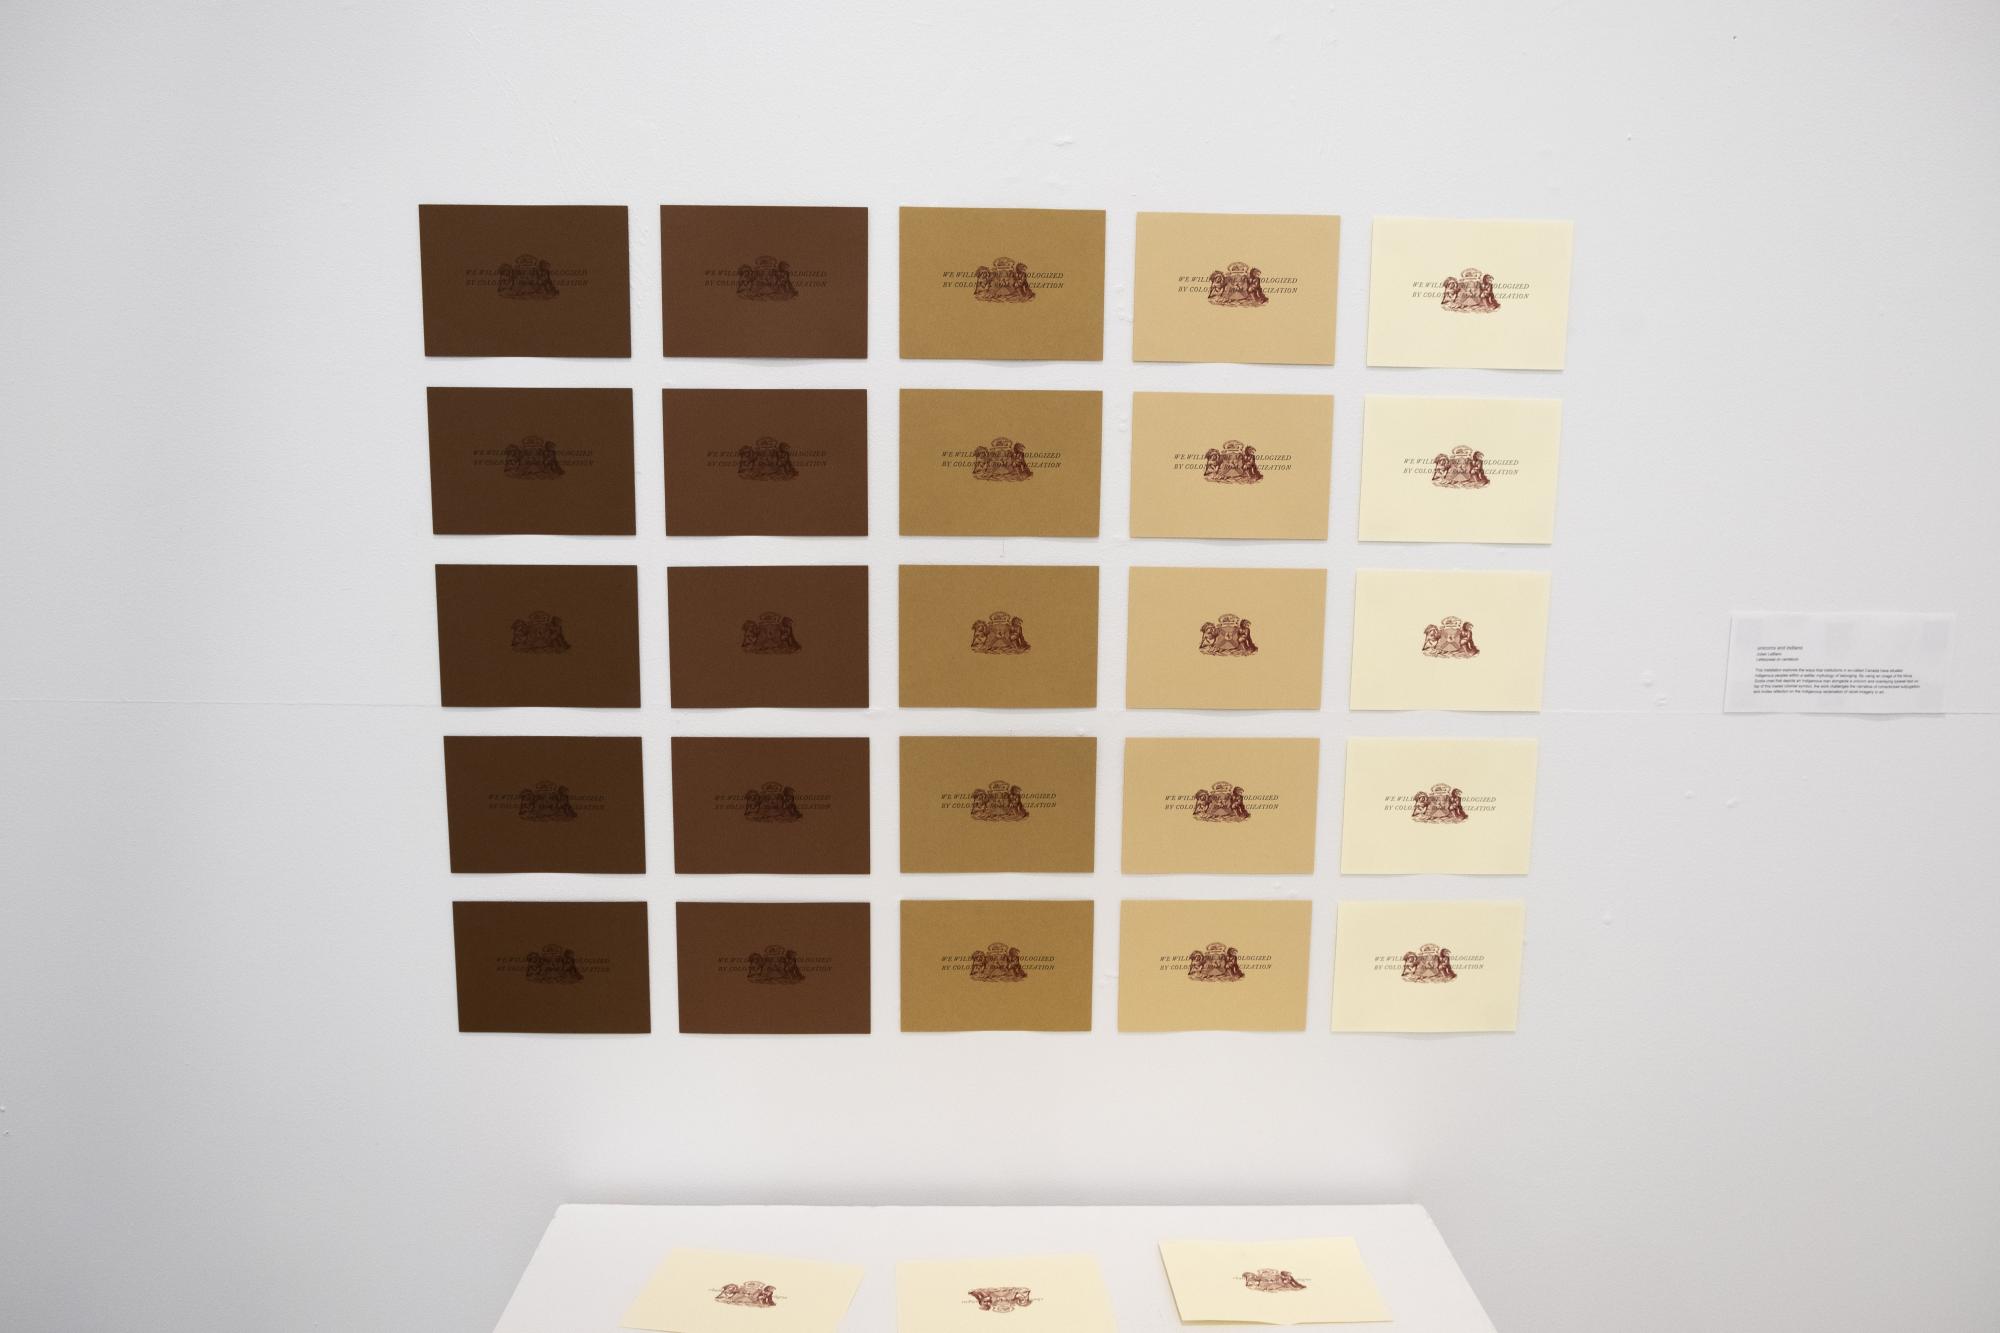 a grid of prints aligned on the wall in a gradient of skin tone colours, starting with dark brown on the left column and moving to white in the furthest right column